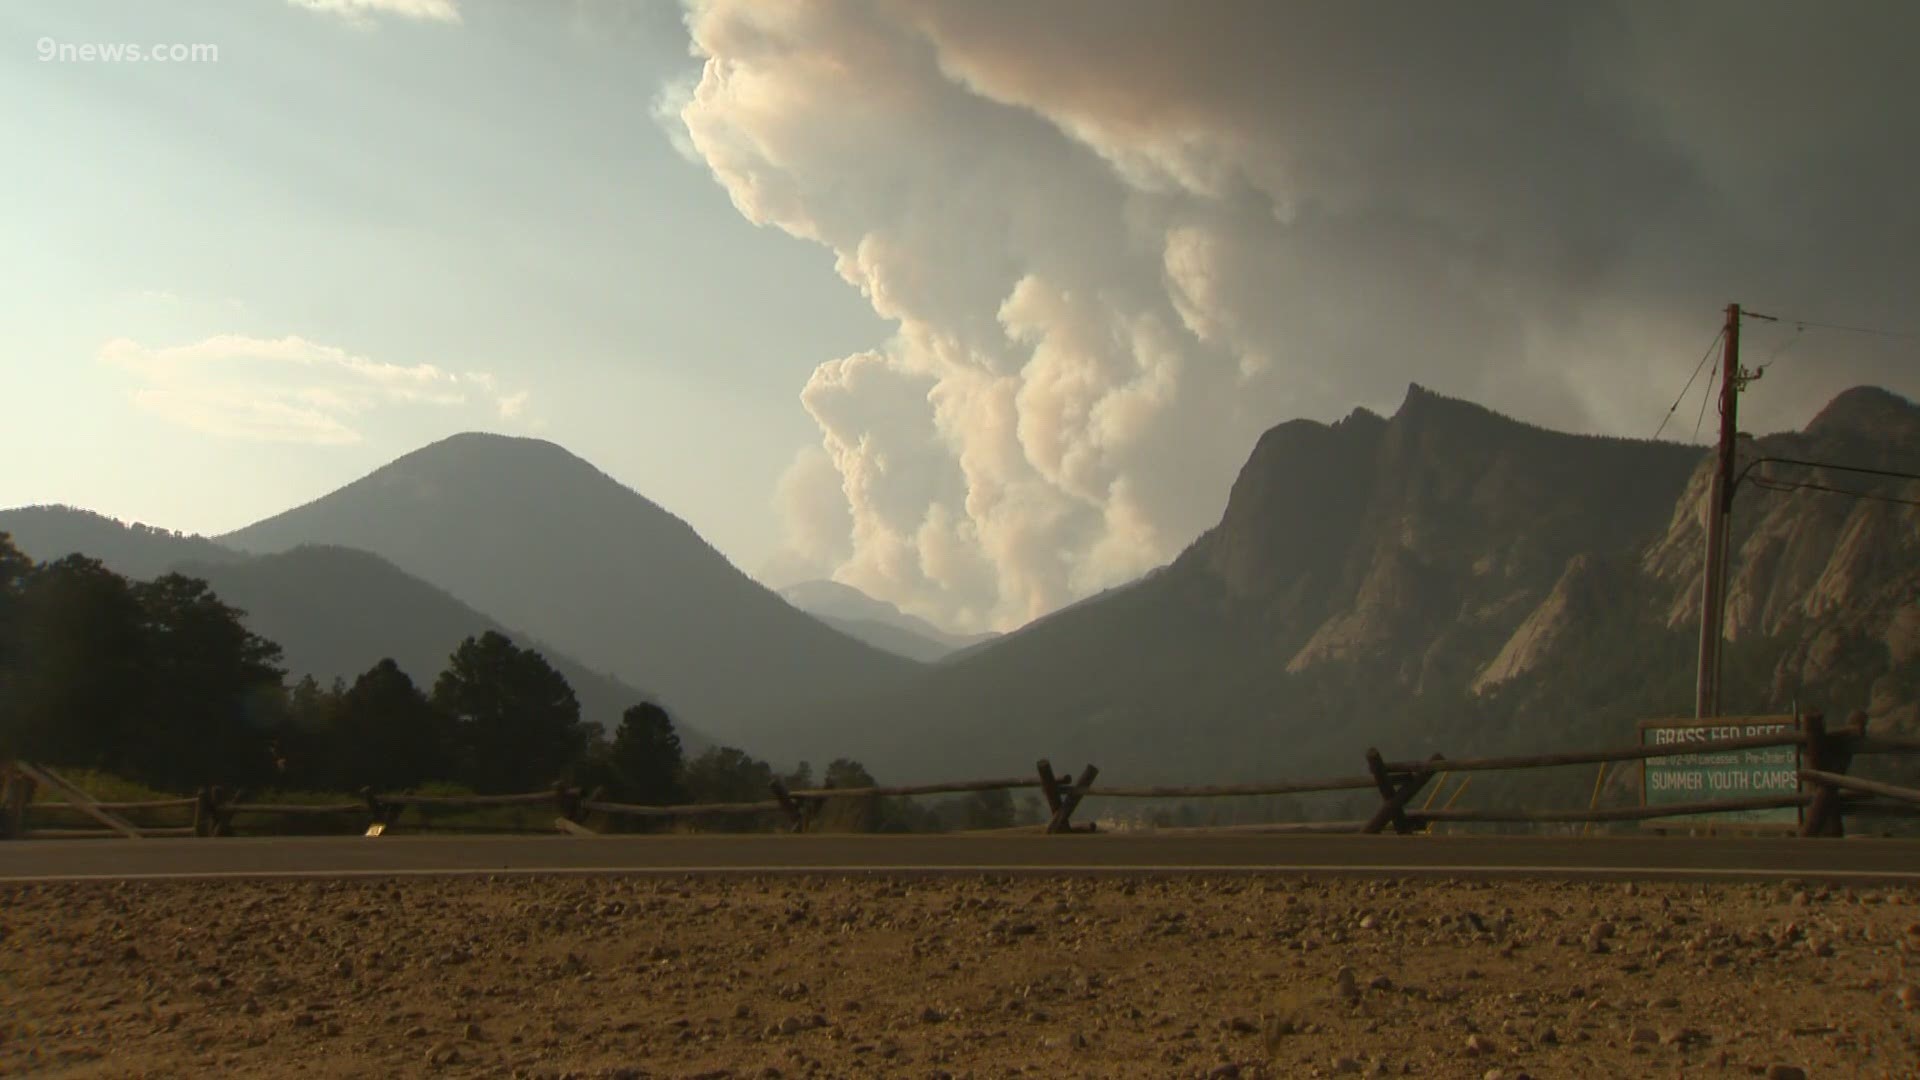 The fire had consumed 34,289 acres as of Sunday evening. The fire is at 5% containment.